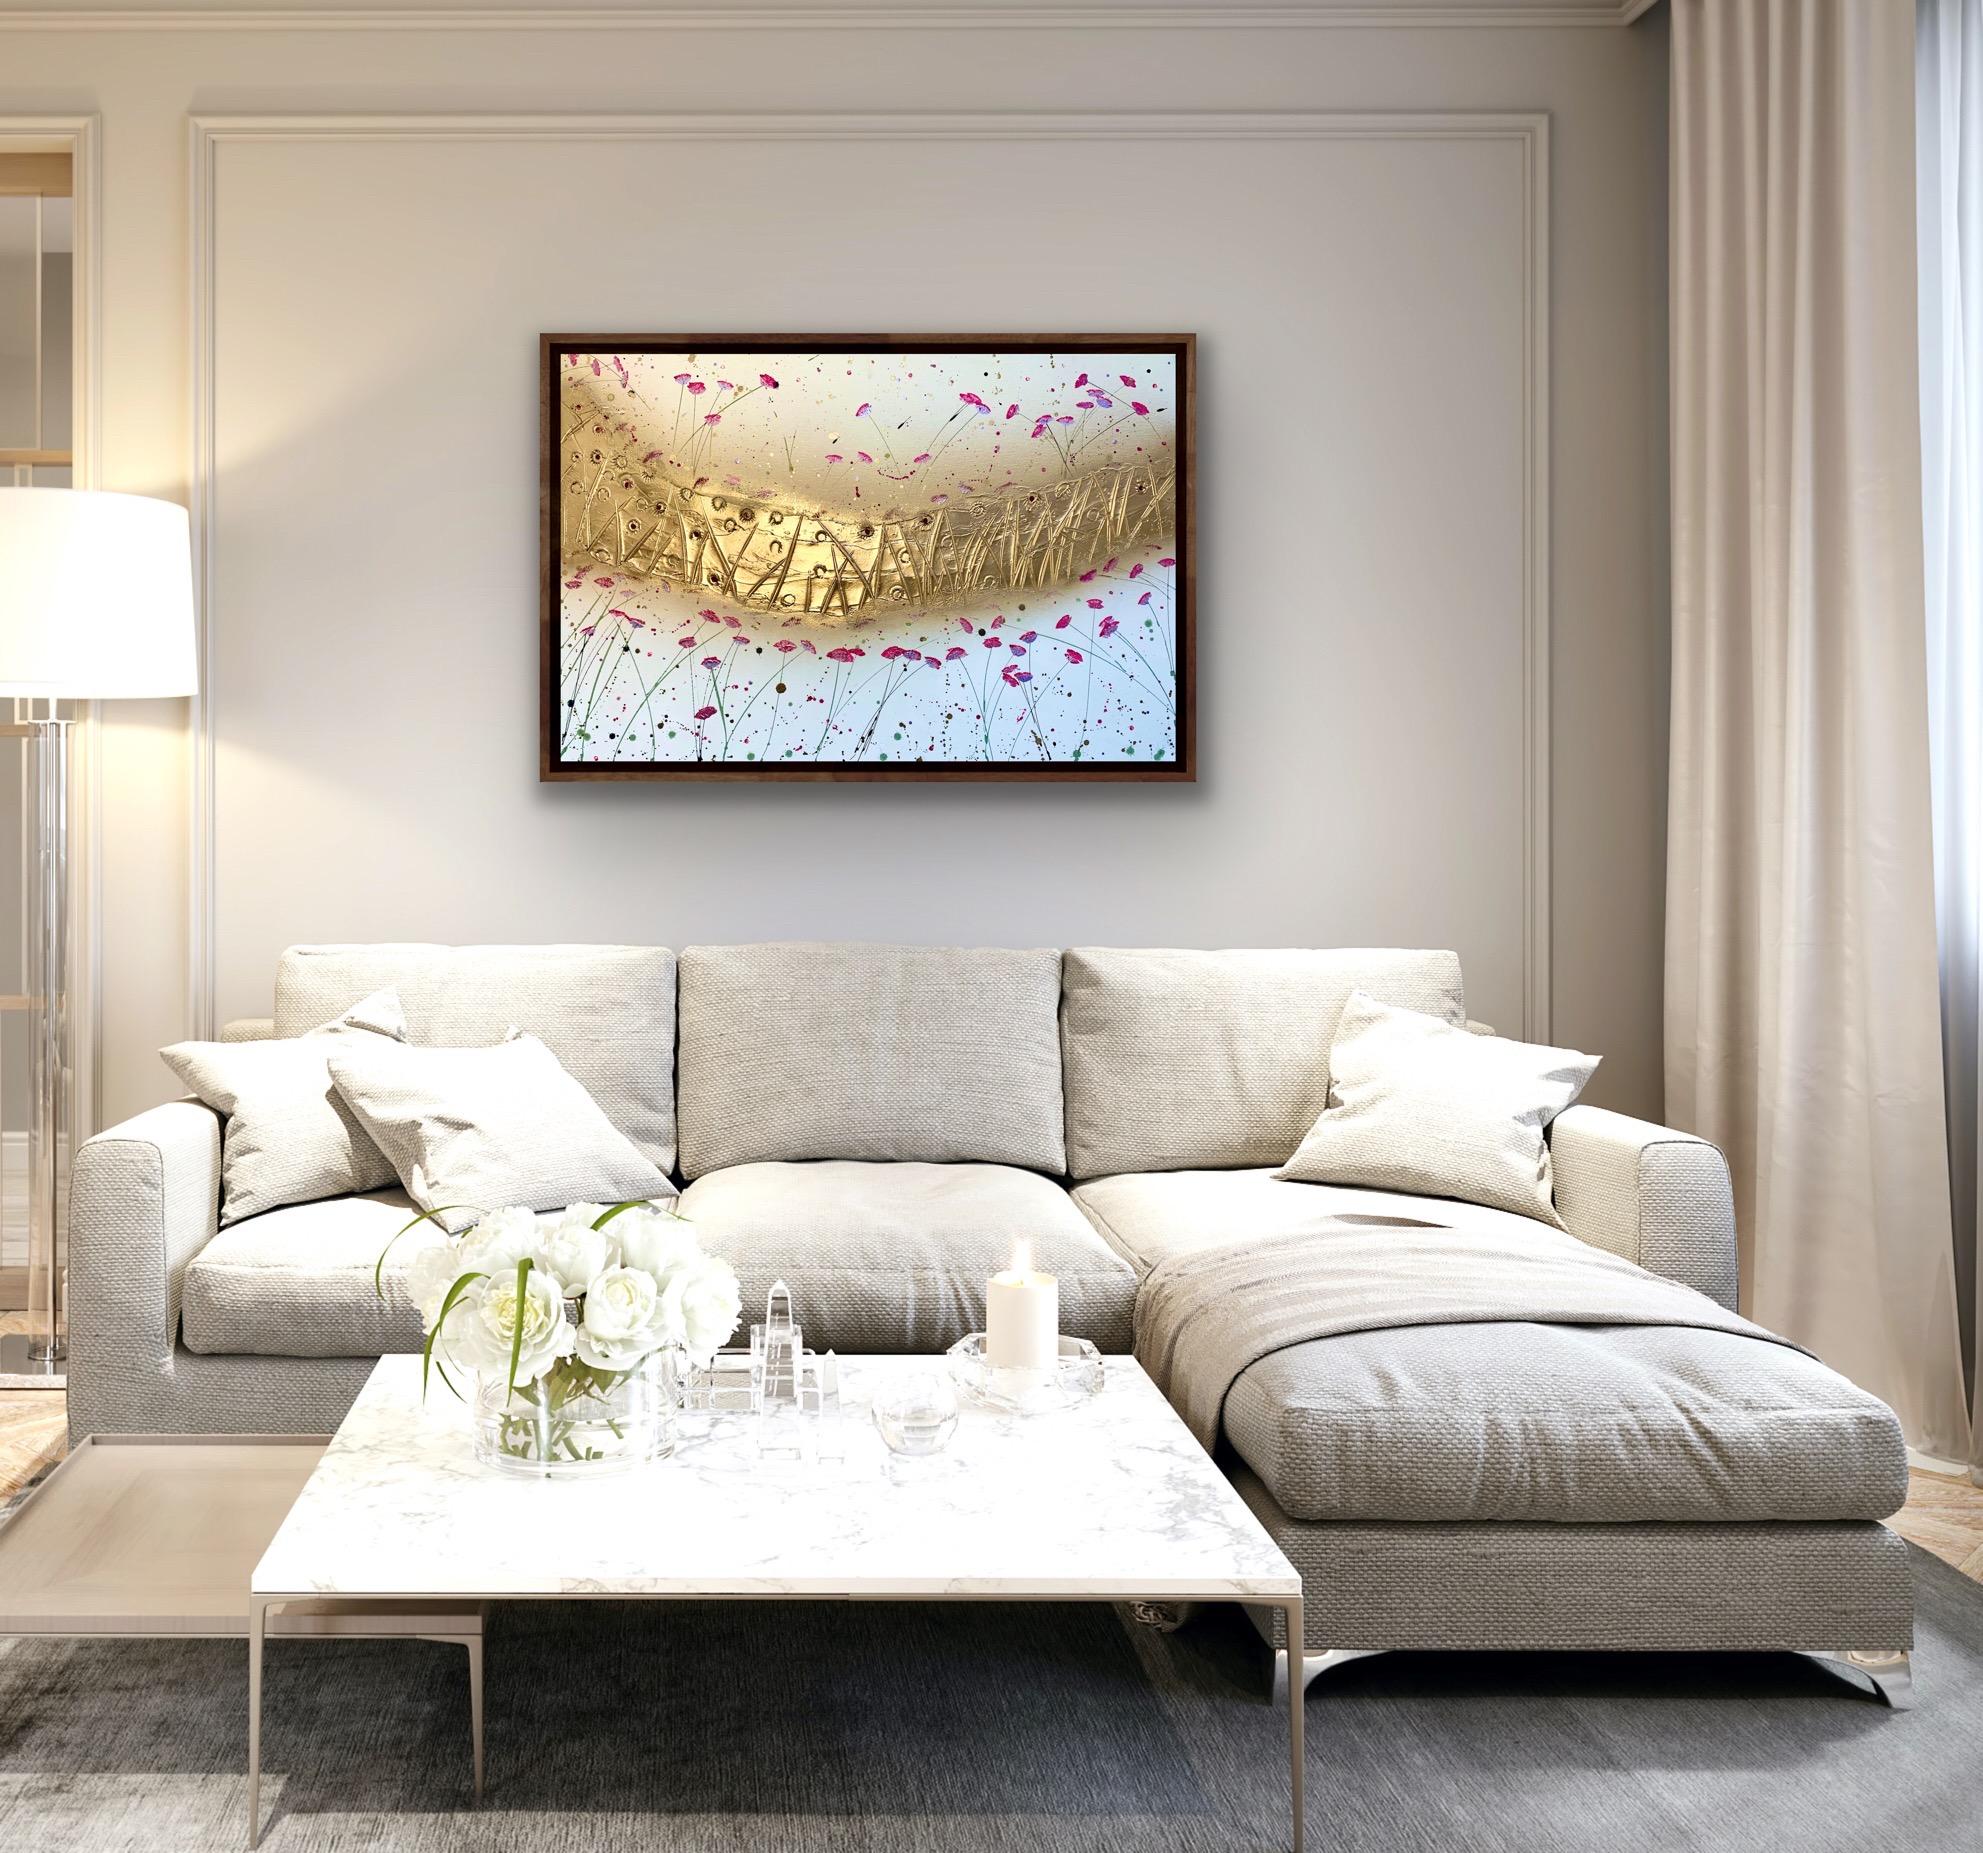 Hot Pink Radiance, Bright Abstract Painting, Gold Pink and White Art, Interior - Beige Interior Painting by Sarah Berger